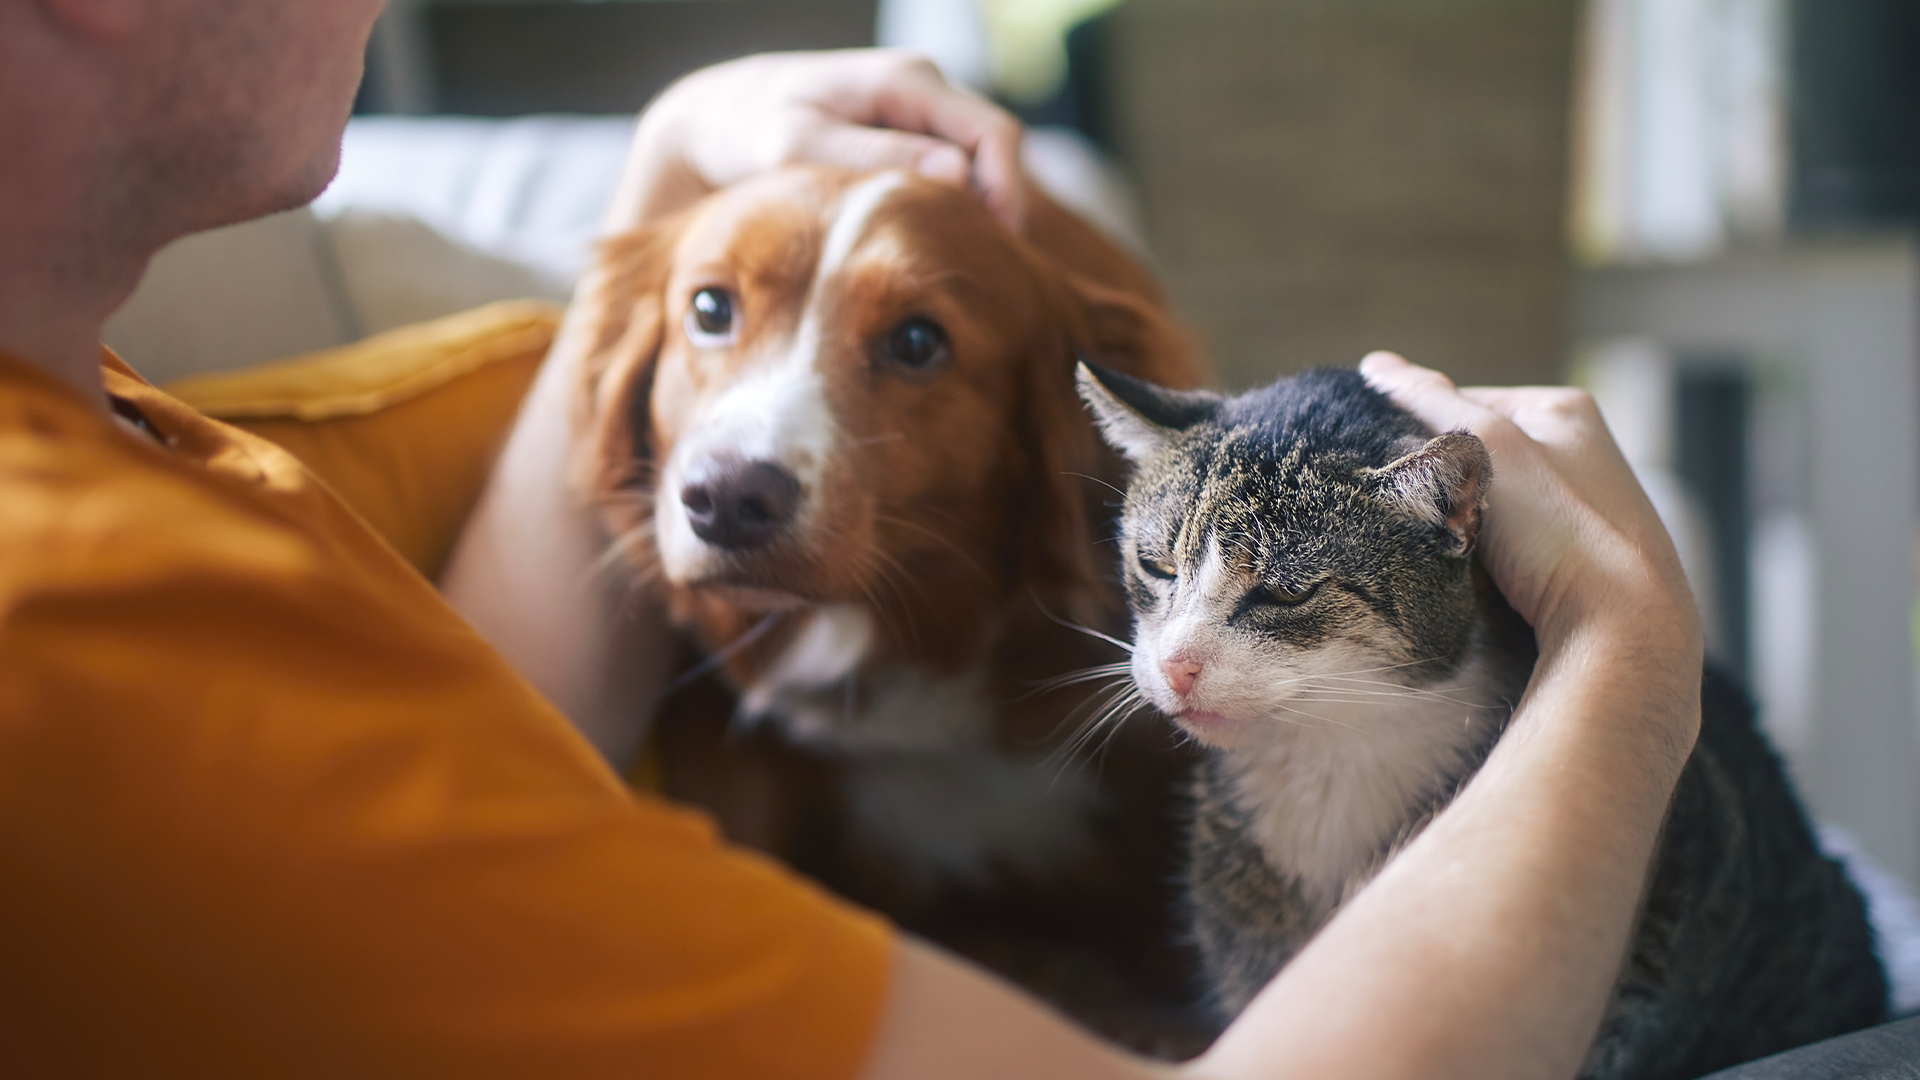 Dog and cat being embraced by a person in an orange shirt